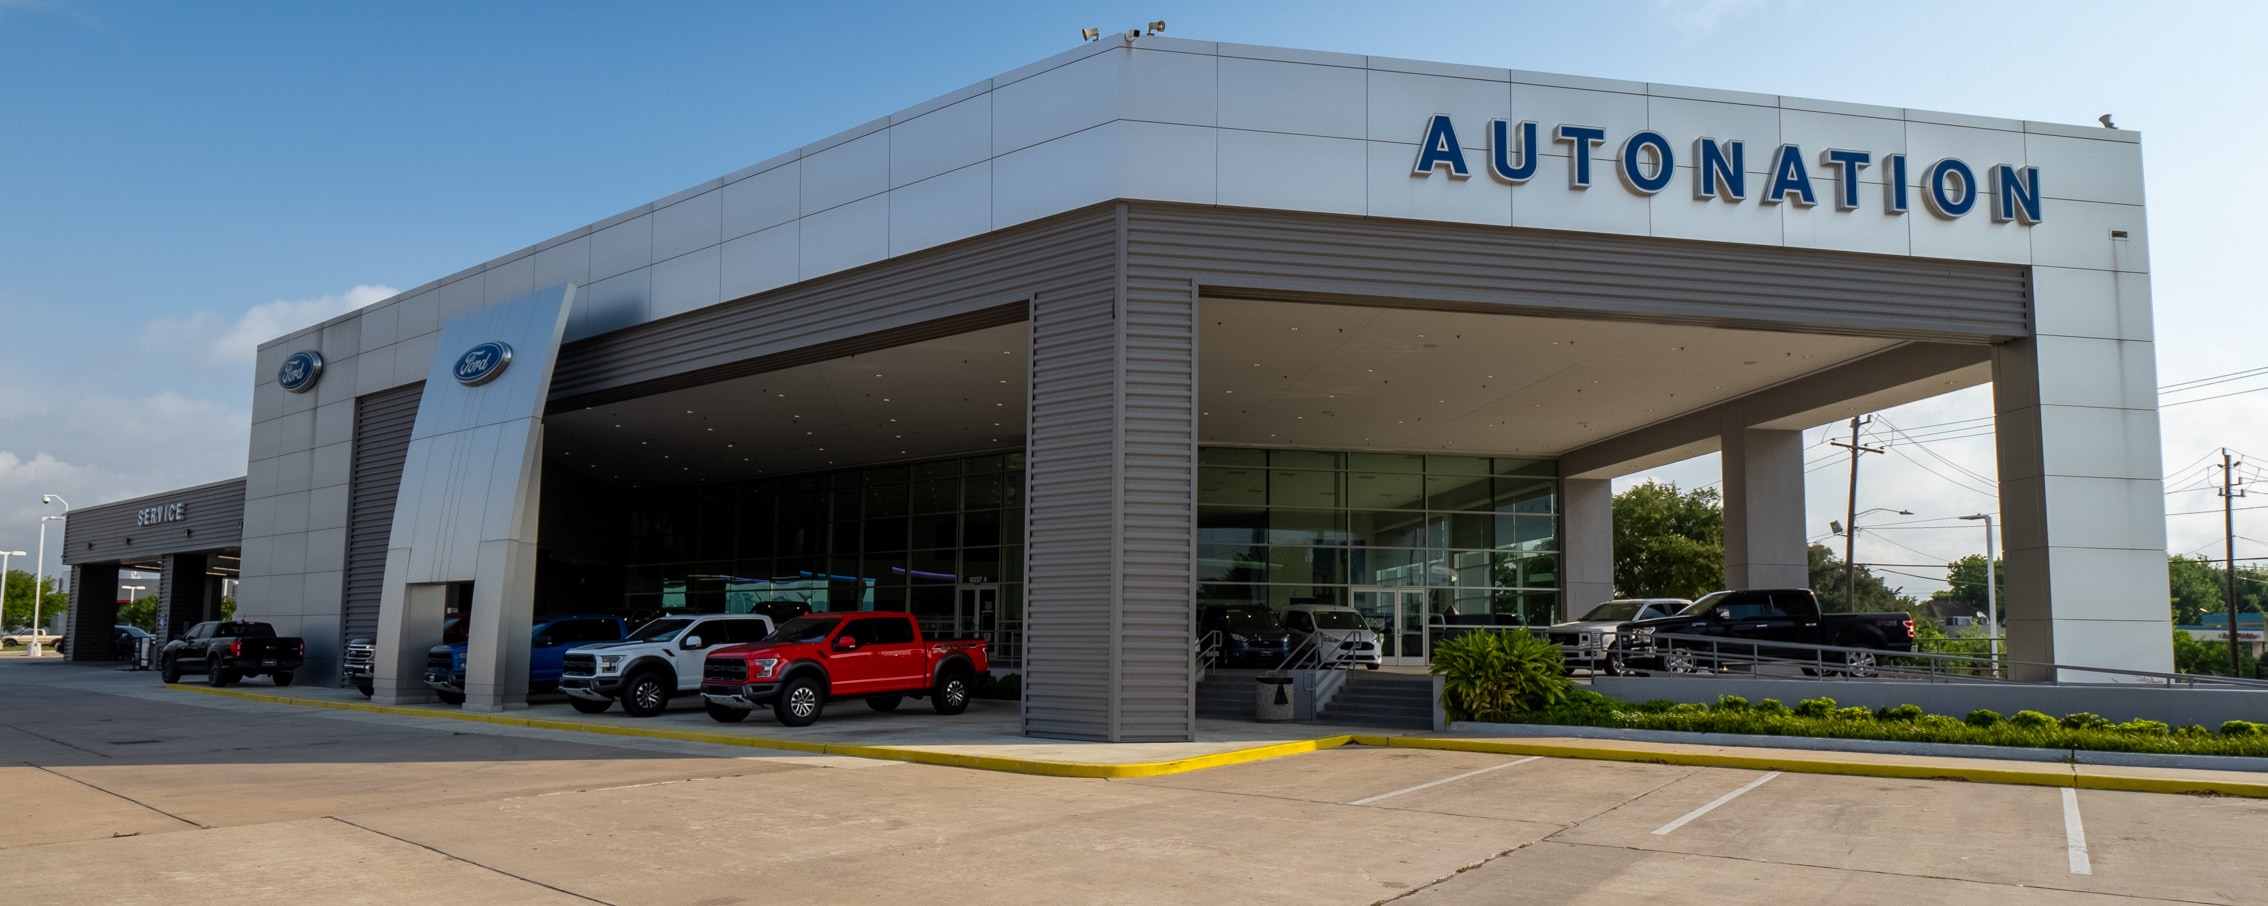 Exterior view of AutoNation Ford Gulf Freeway